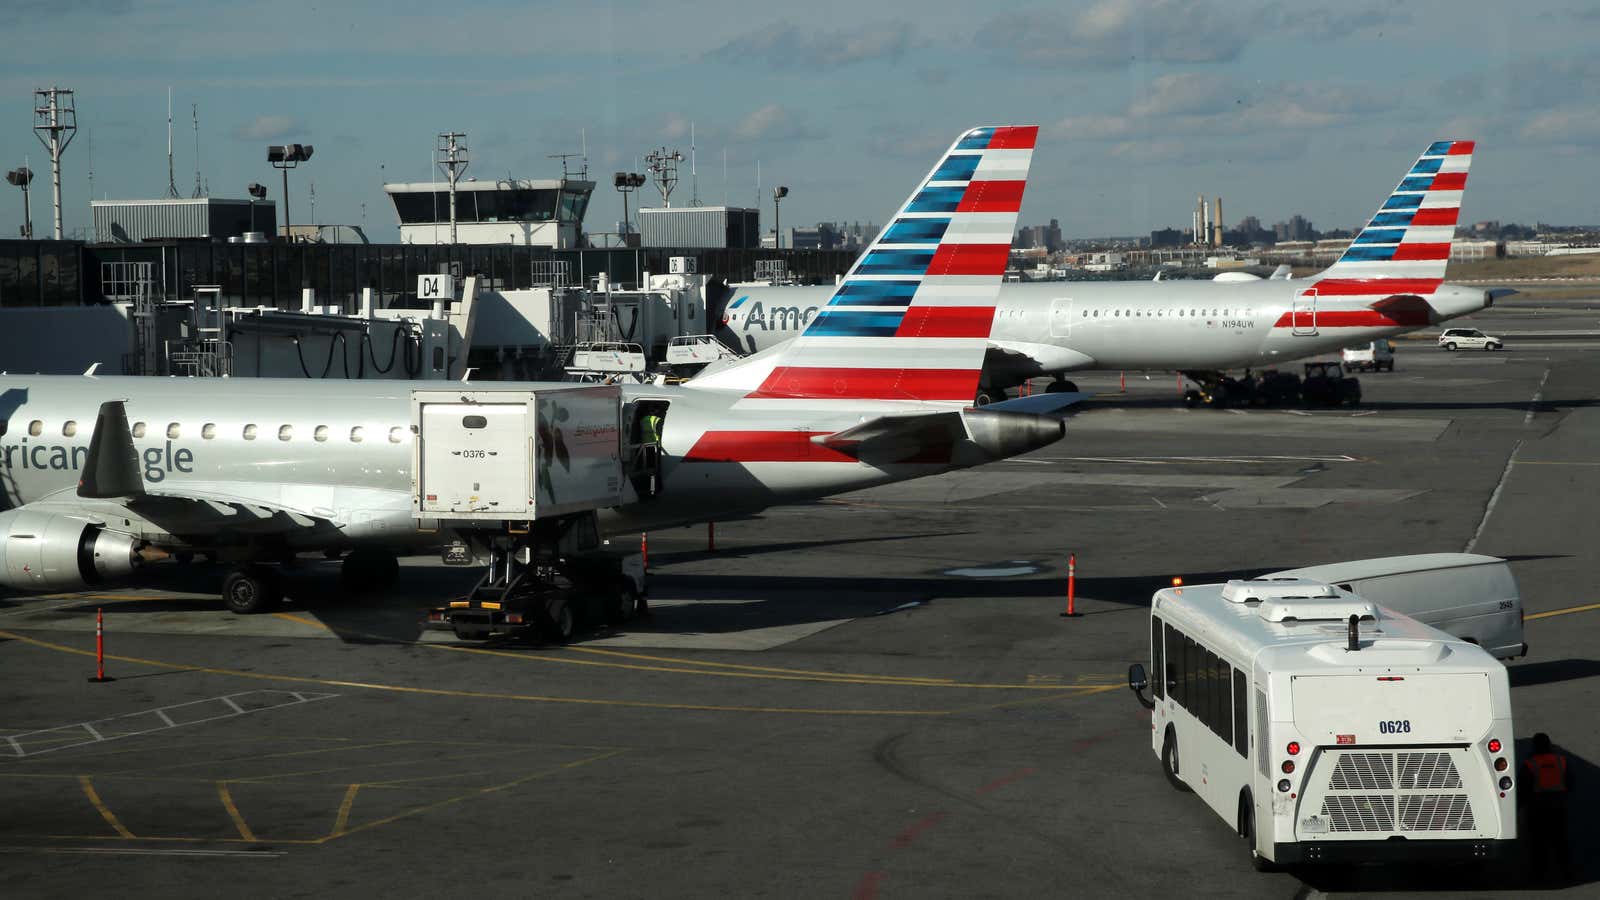 Planes are seen parked at the terminal at LaGuardia Airport in New York City after hundreds of flights were grounded or delayed at New York-area airports as more air traffic controllers called in sick on Friday, in one of the most tangible signs yet of disruption from a 35-day partial shutdown of the U.S. government, January 25, 2019.